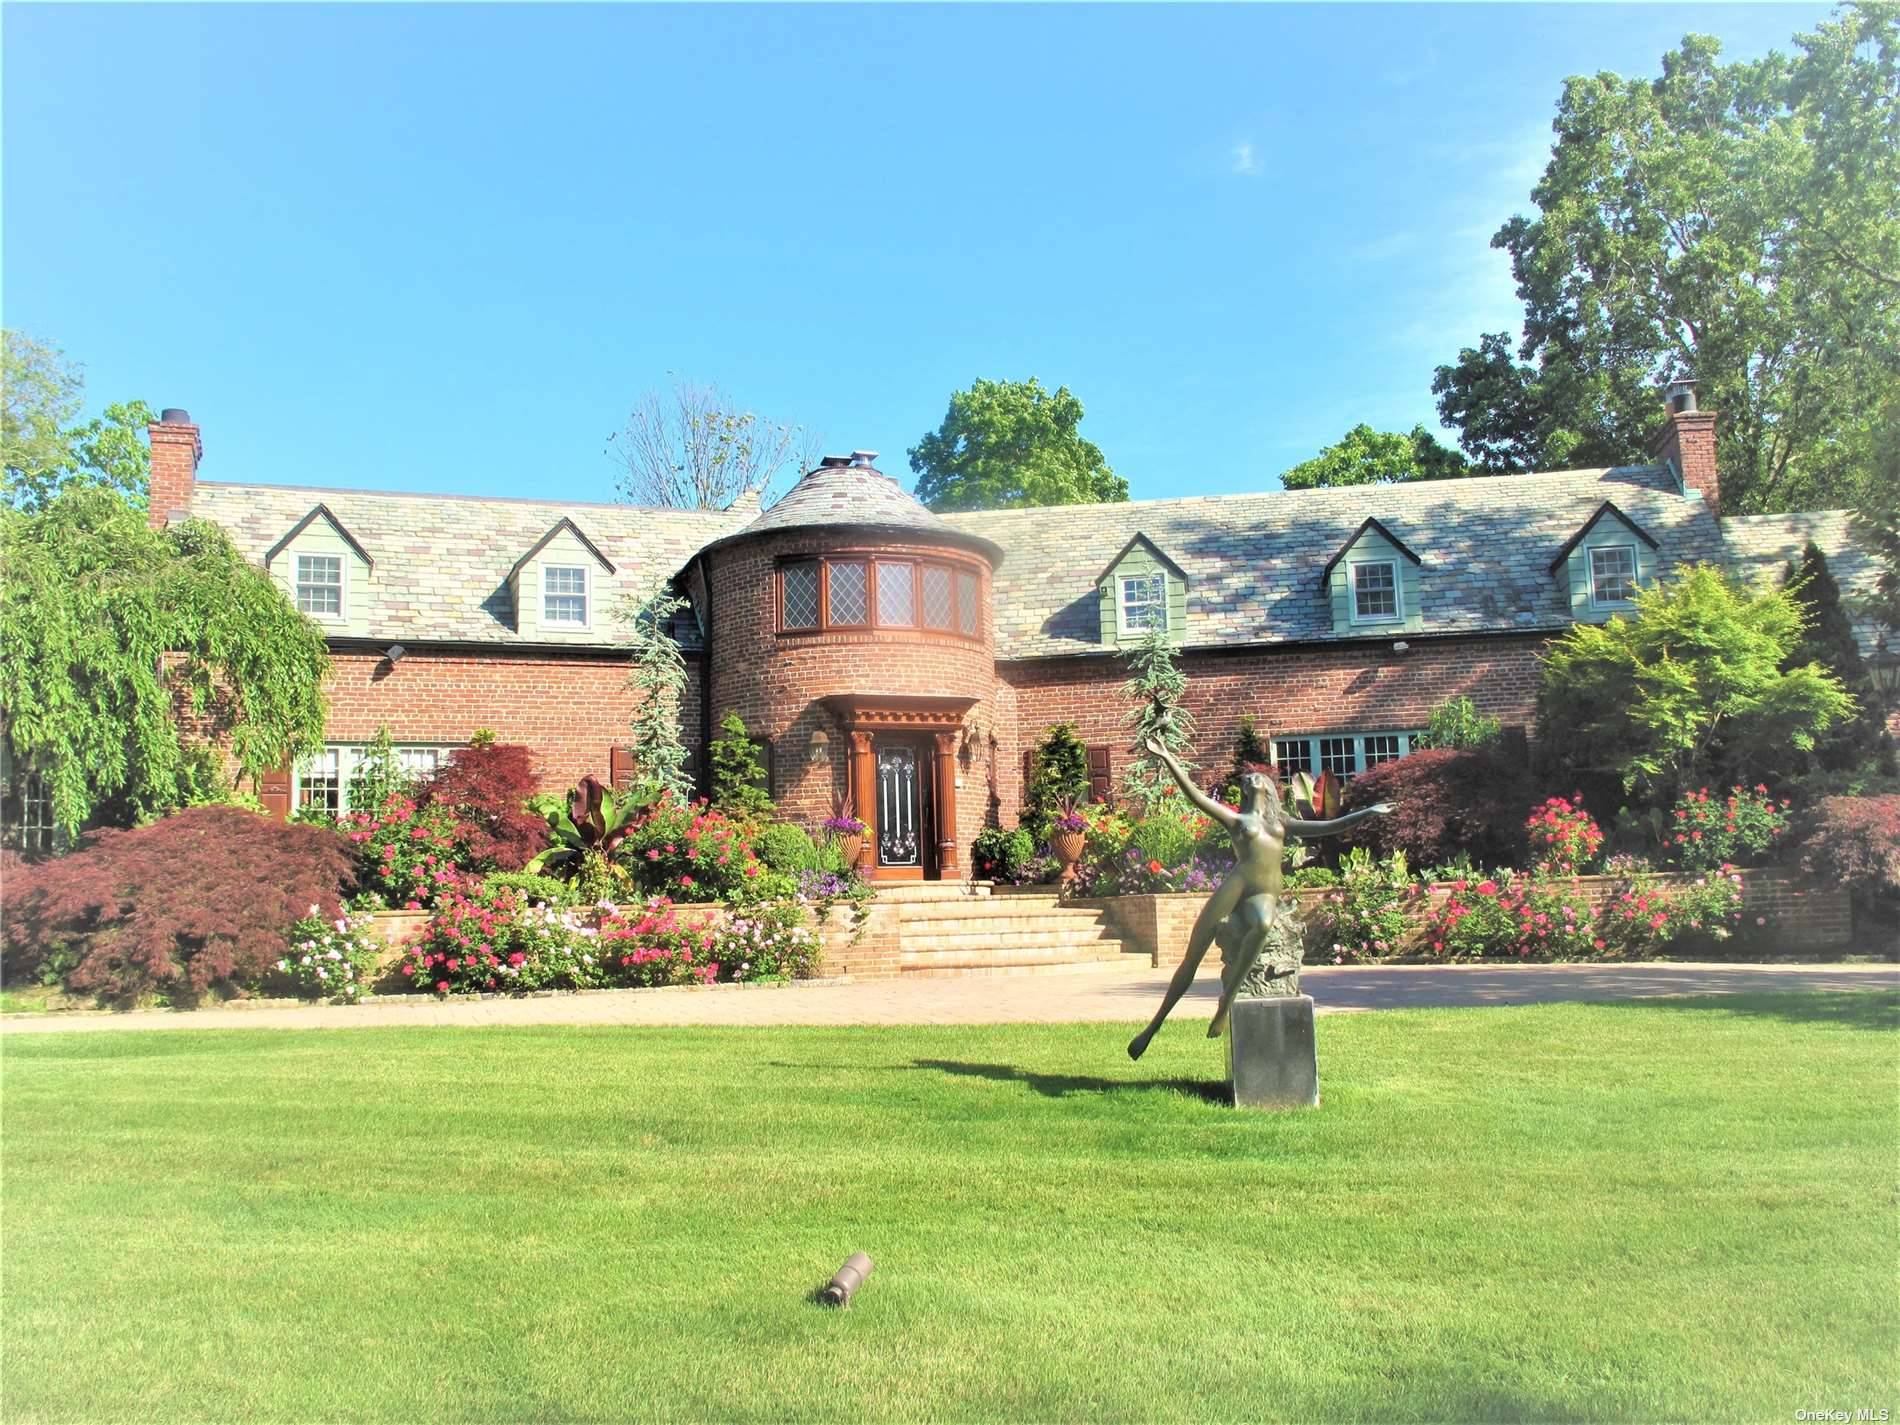 Located on over 1 acre, this old charm estate offers a 4, 778 sq.